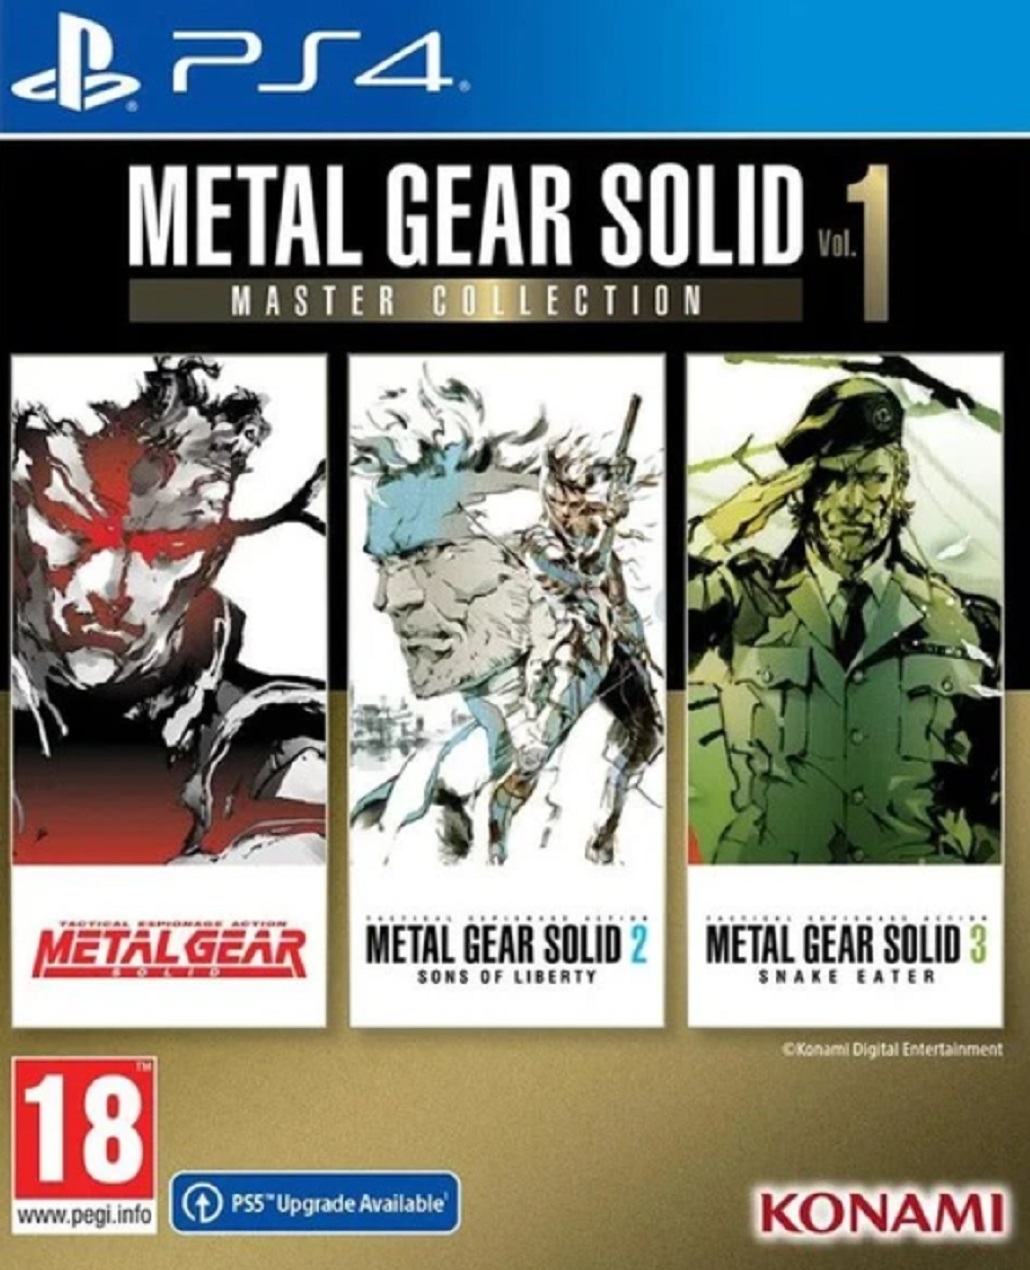 METAL GEAR SOLID MASTER COLLECTION VOLUME 1 (PS4 - NOVÁ)